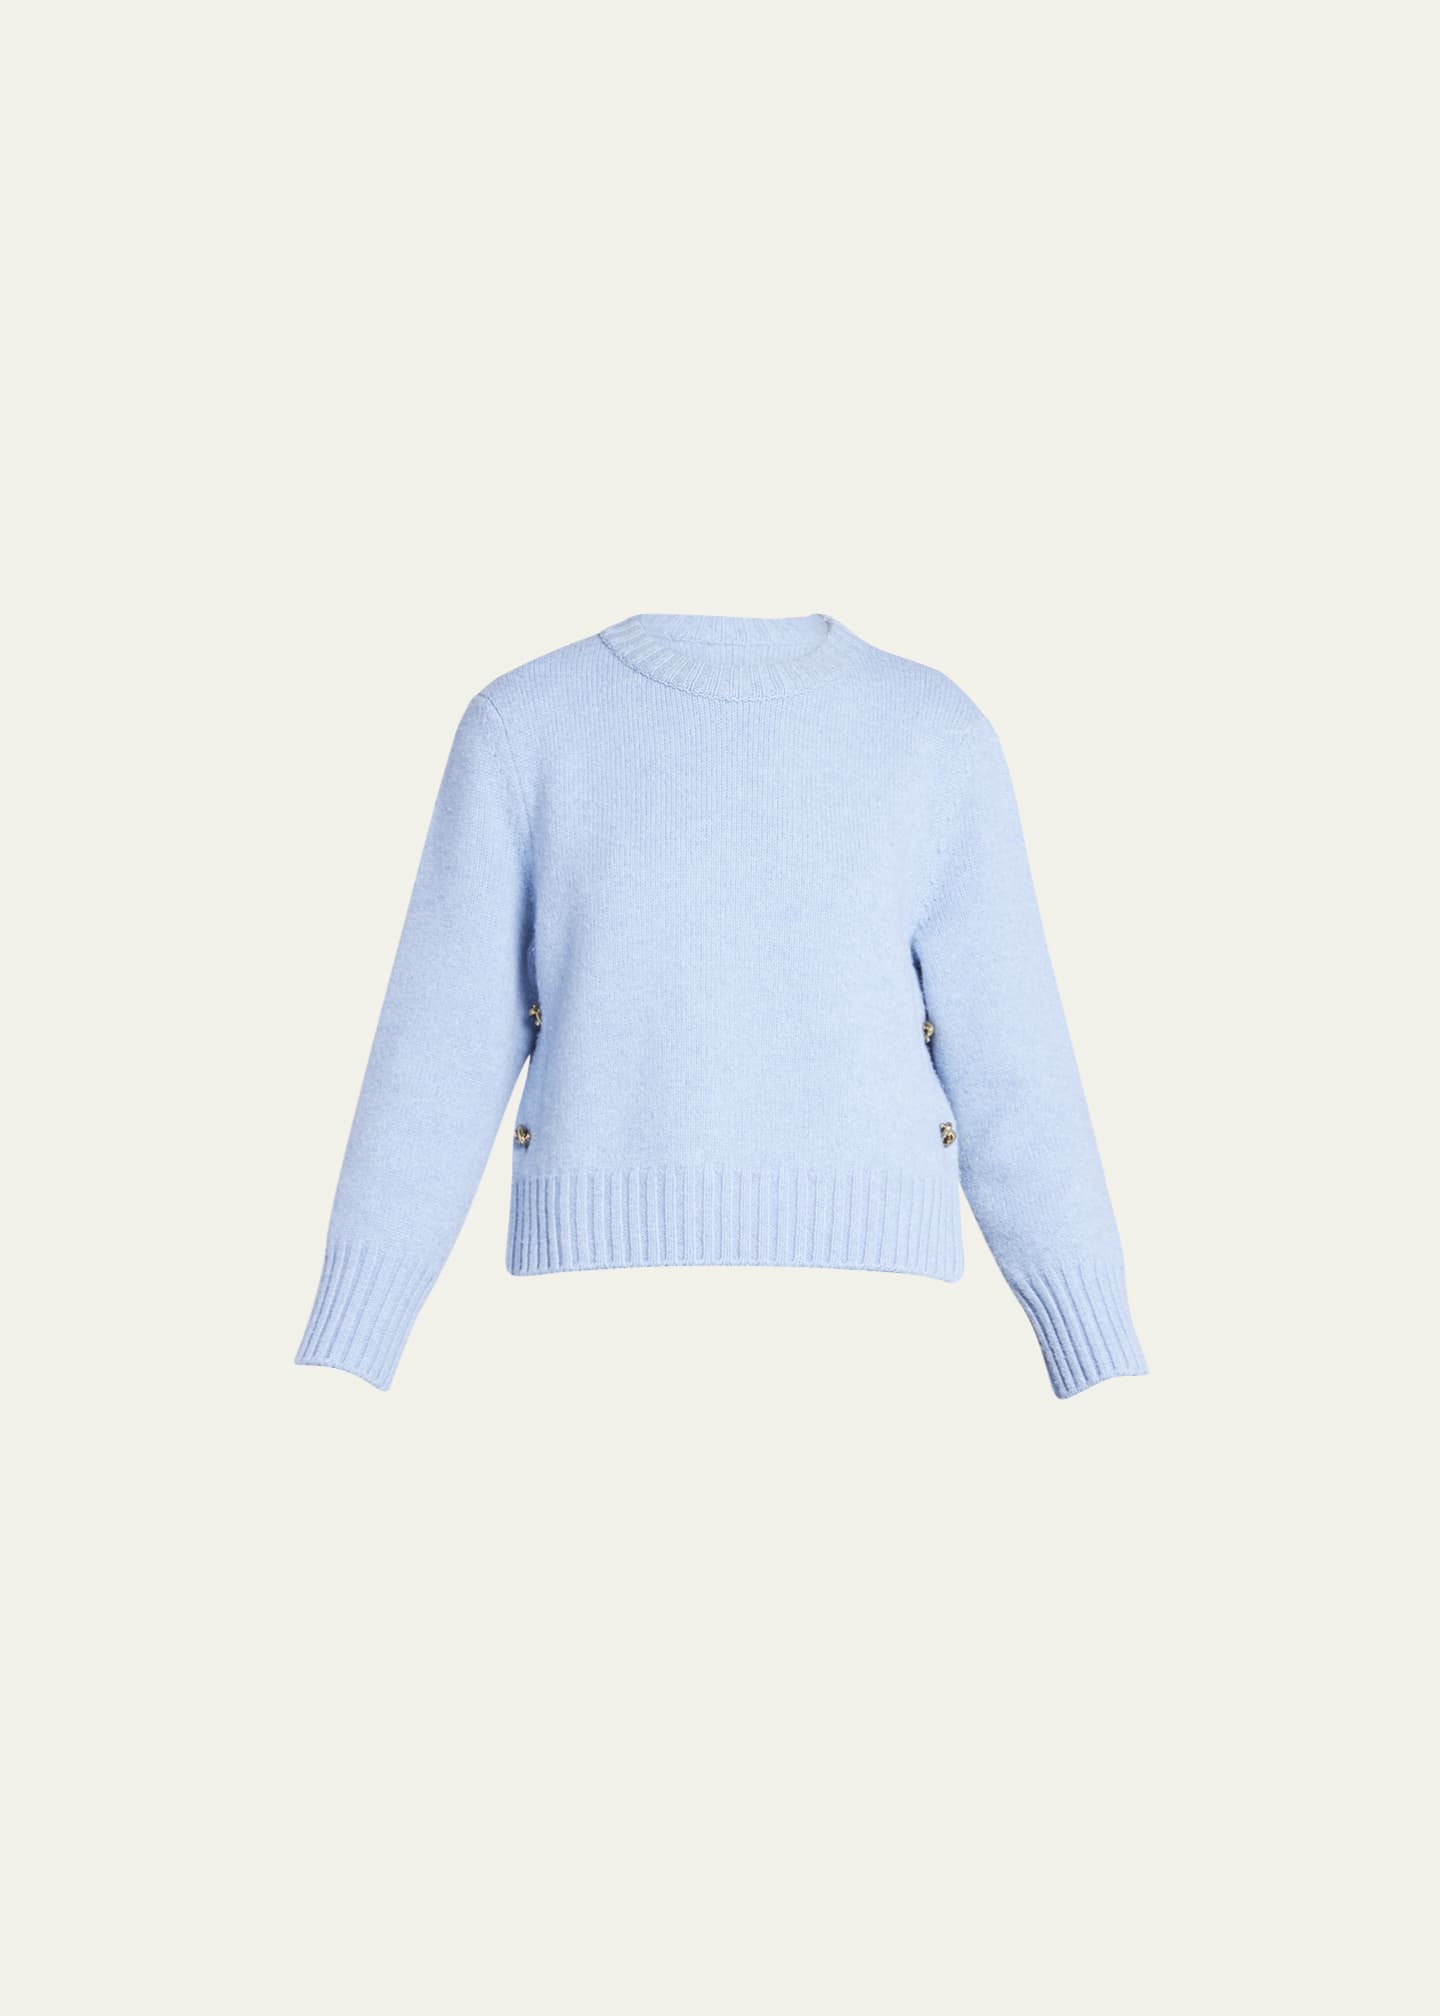 Bottega Veneta Felted Wool Knit Sweater with Side Buttons - Bergdorf ...